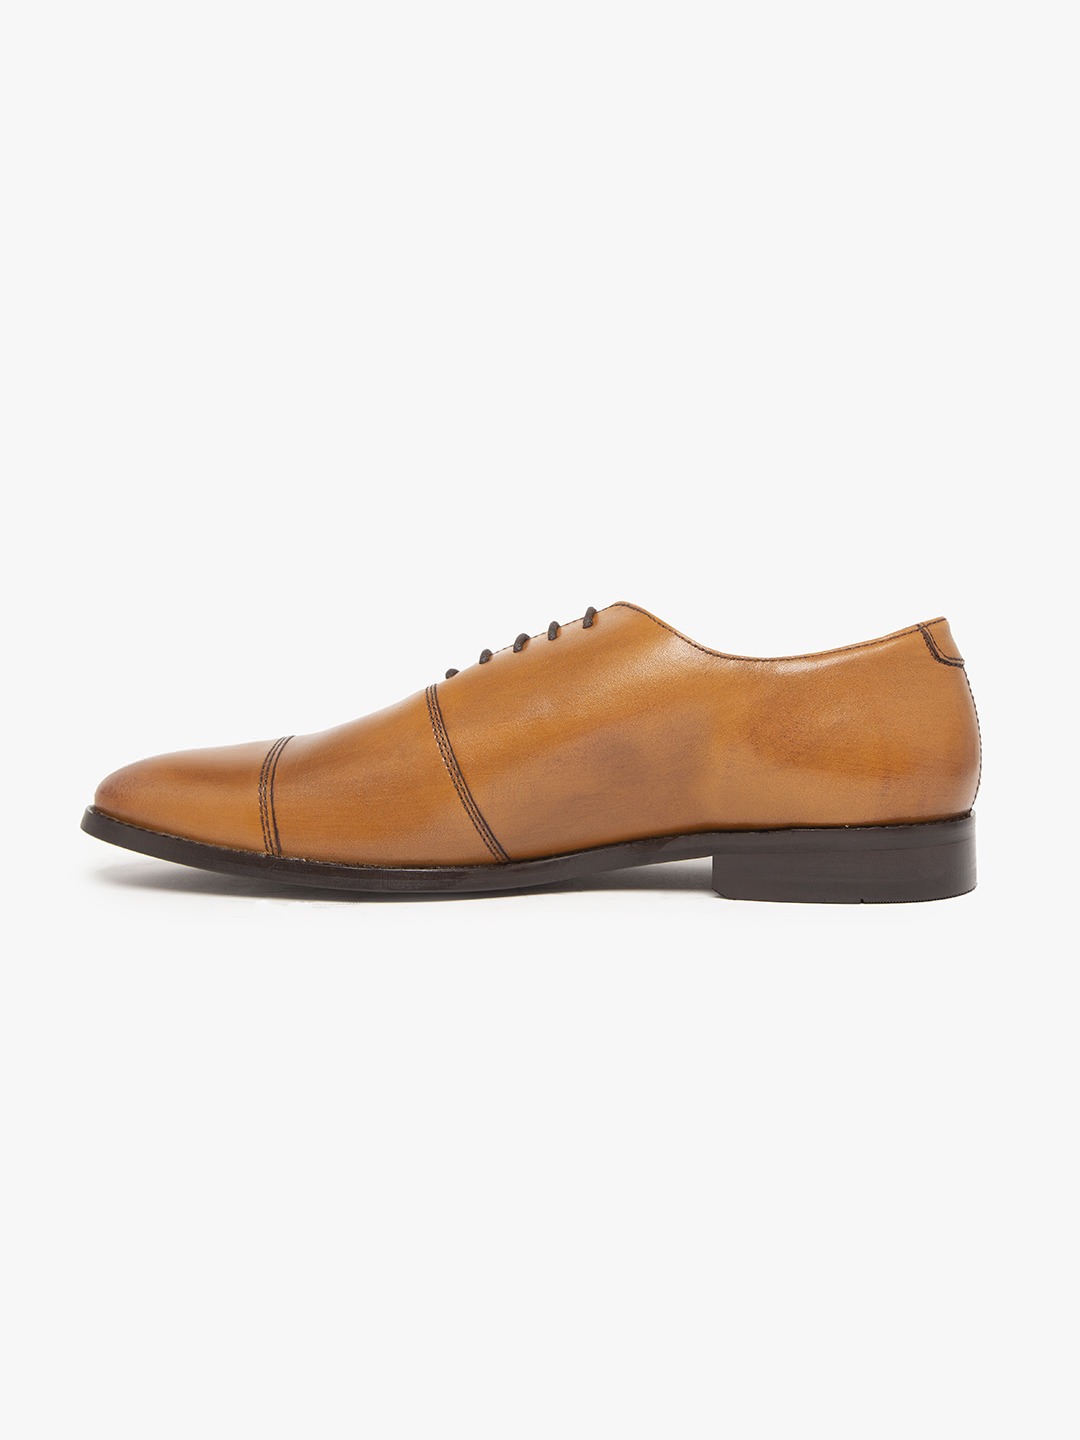 Buy Online Genuine Leather Tan Oxford Shoes online